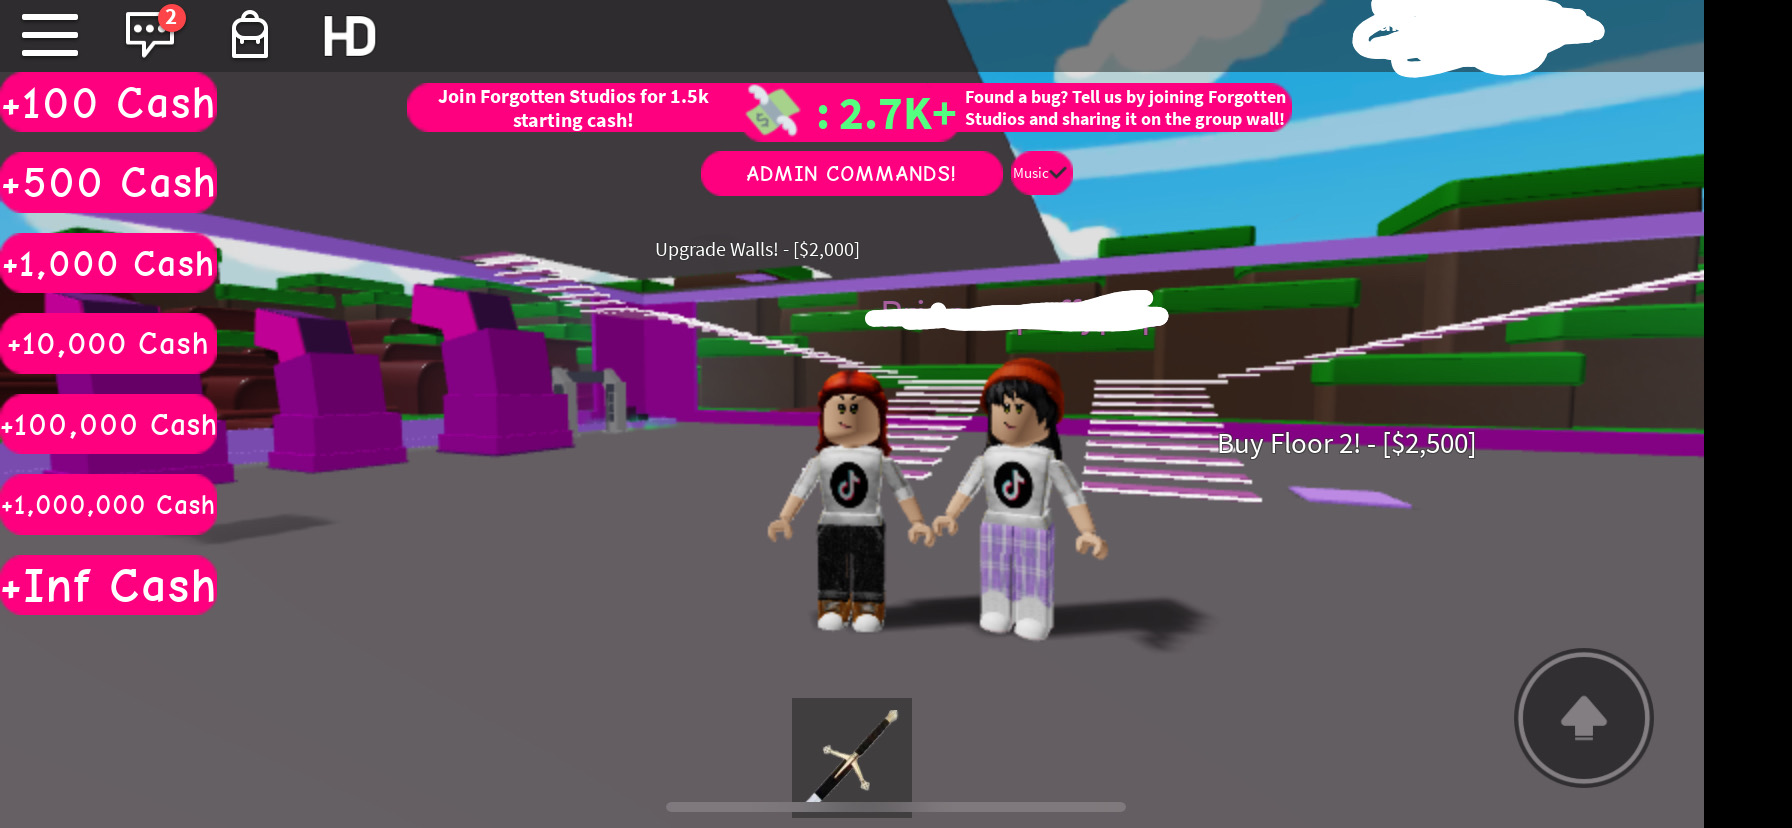 Roblox Tiktok Playing Roblox With Image By Shaaned222 - buy 1 000 000 cash roblox